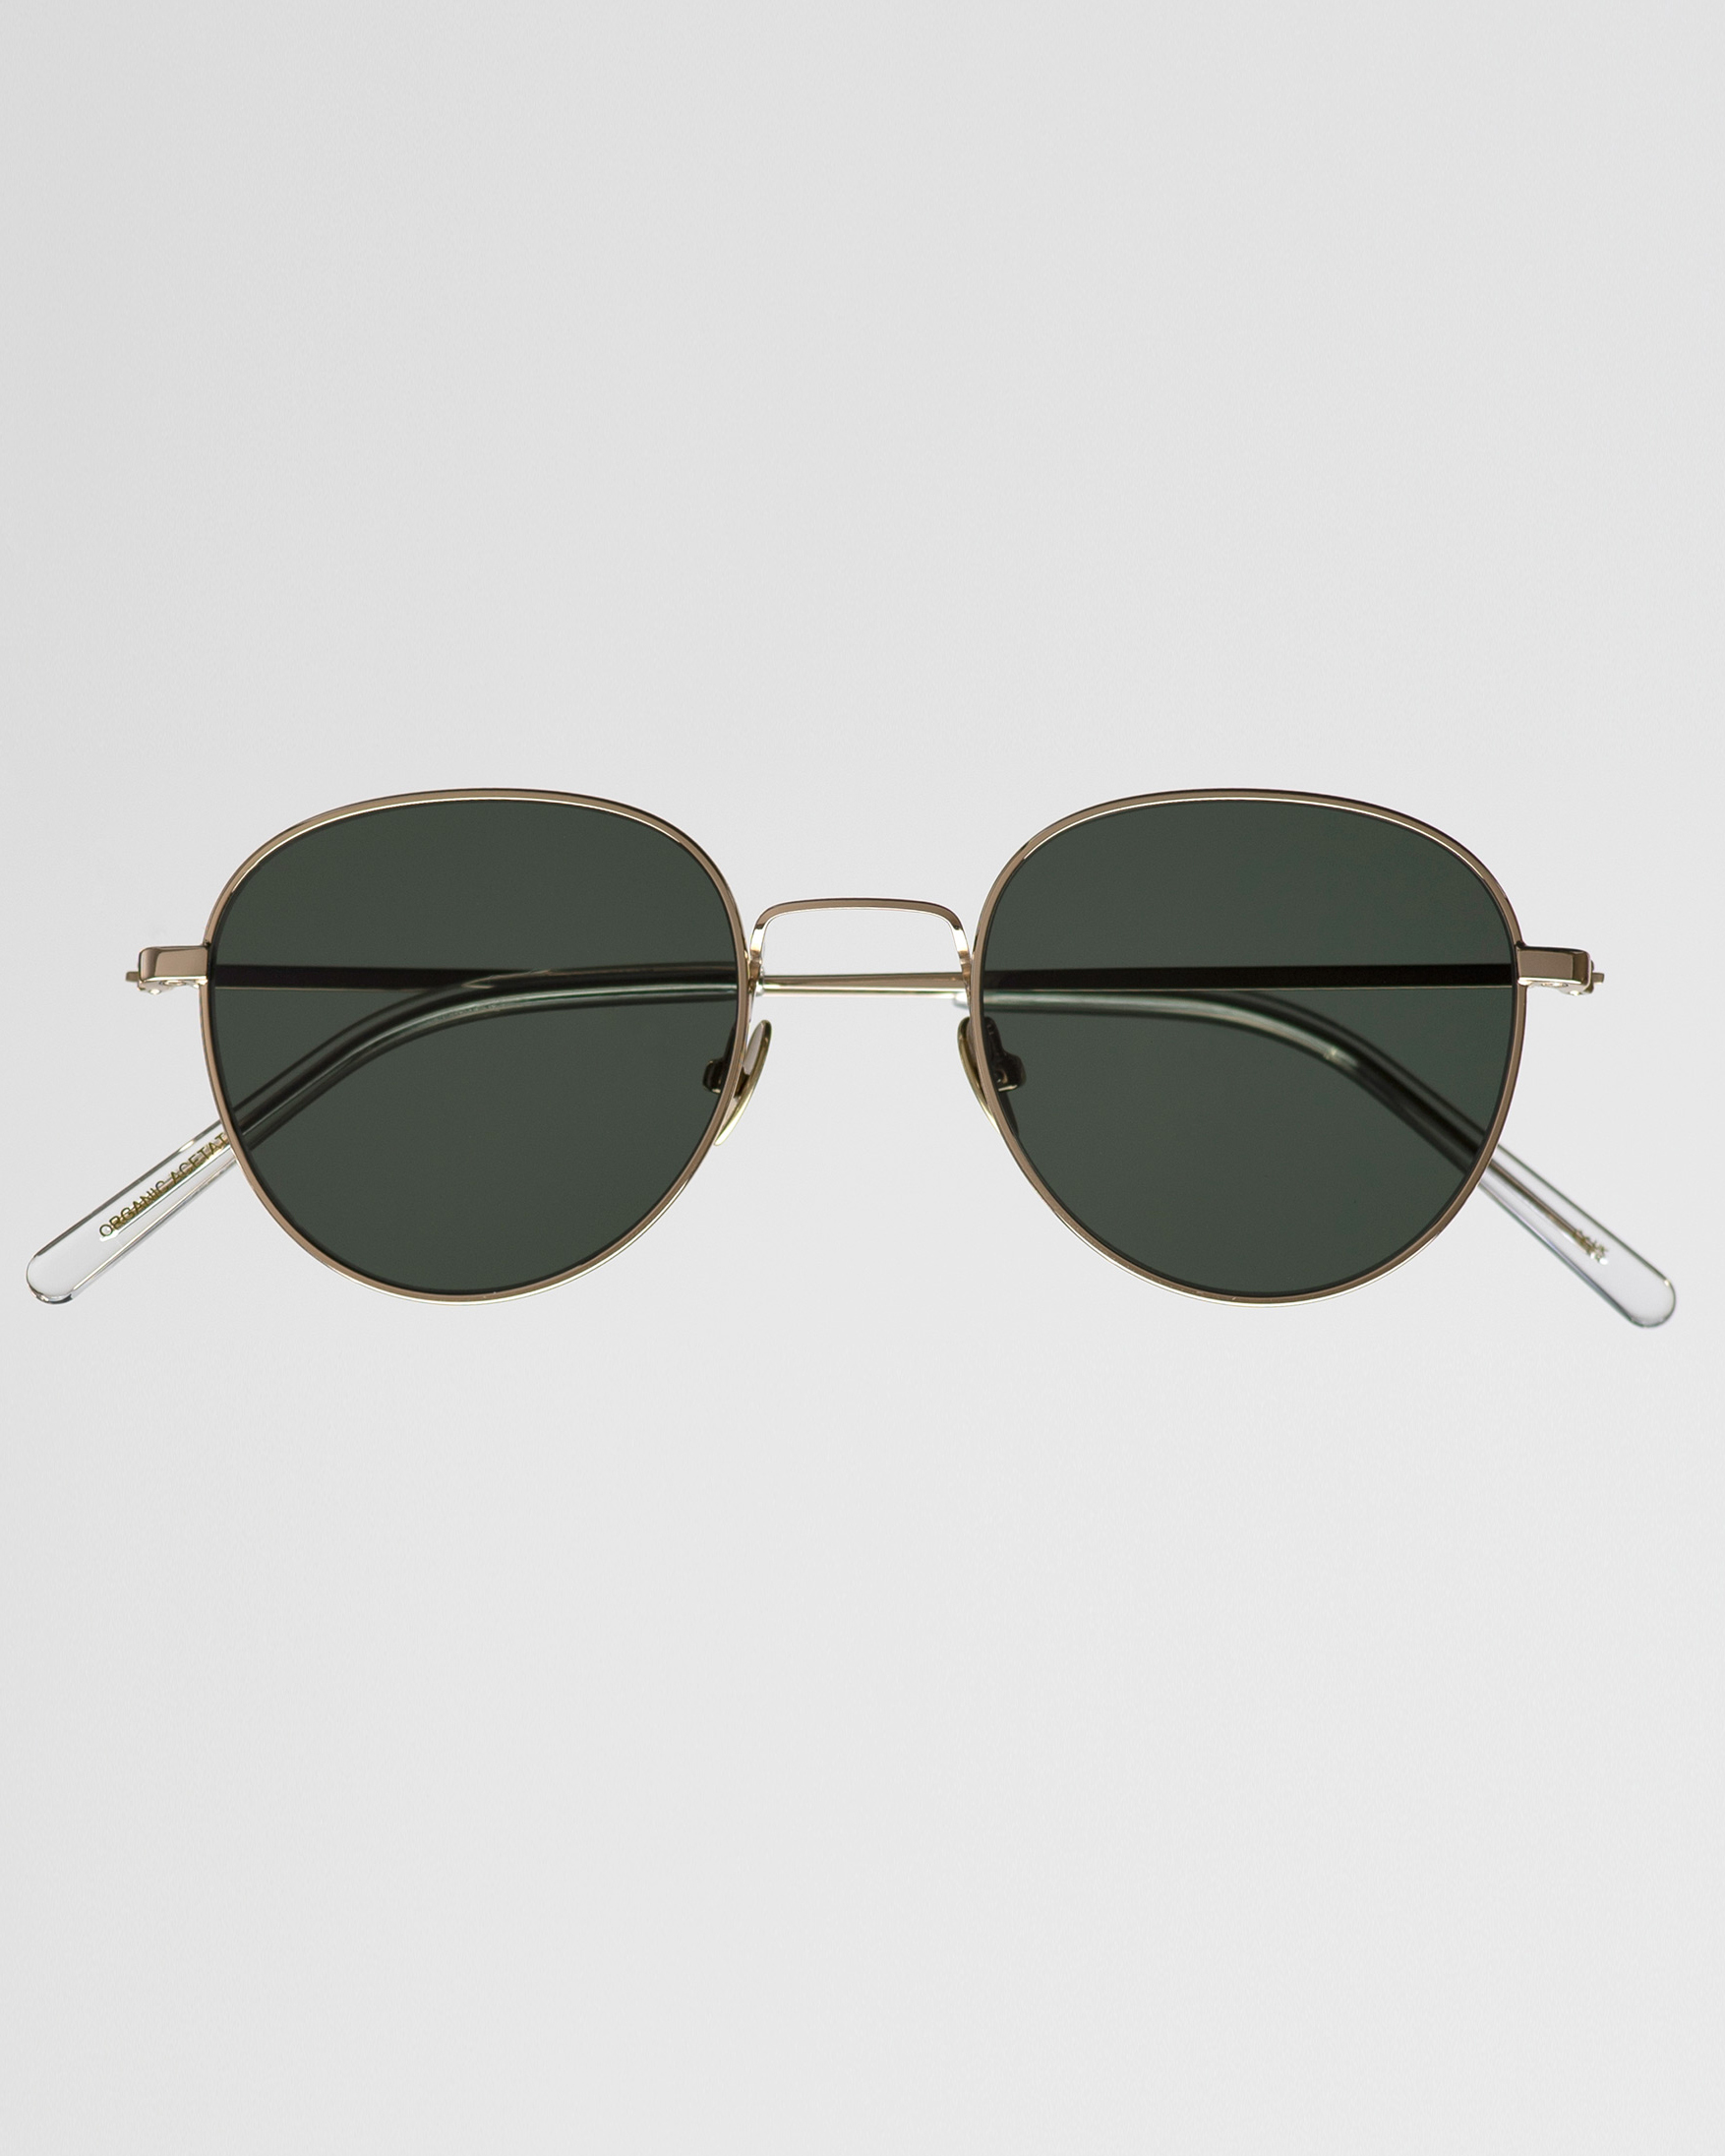 Rio Gold - Green Solid Lens